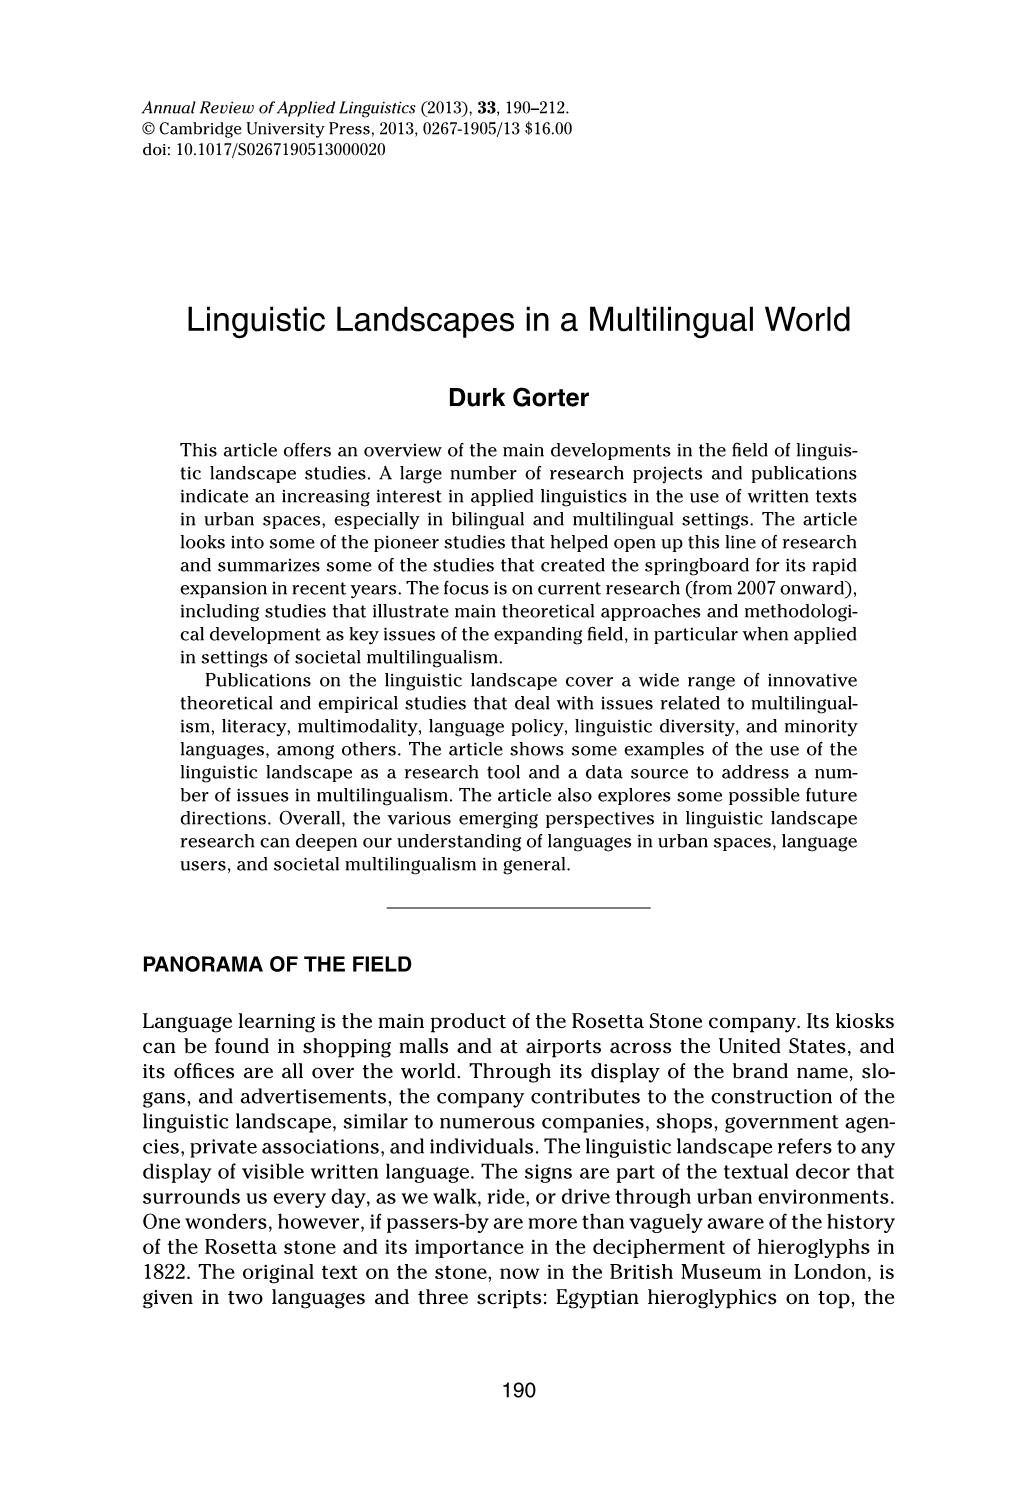 Linguistic Landscapes in a Multilingual World